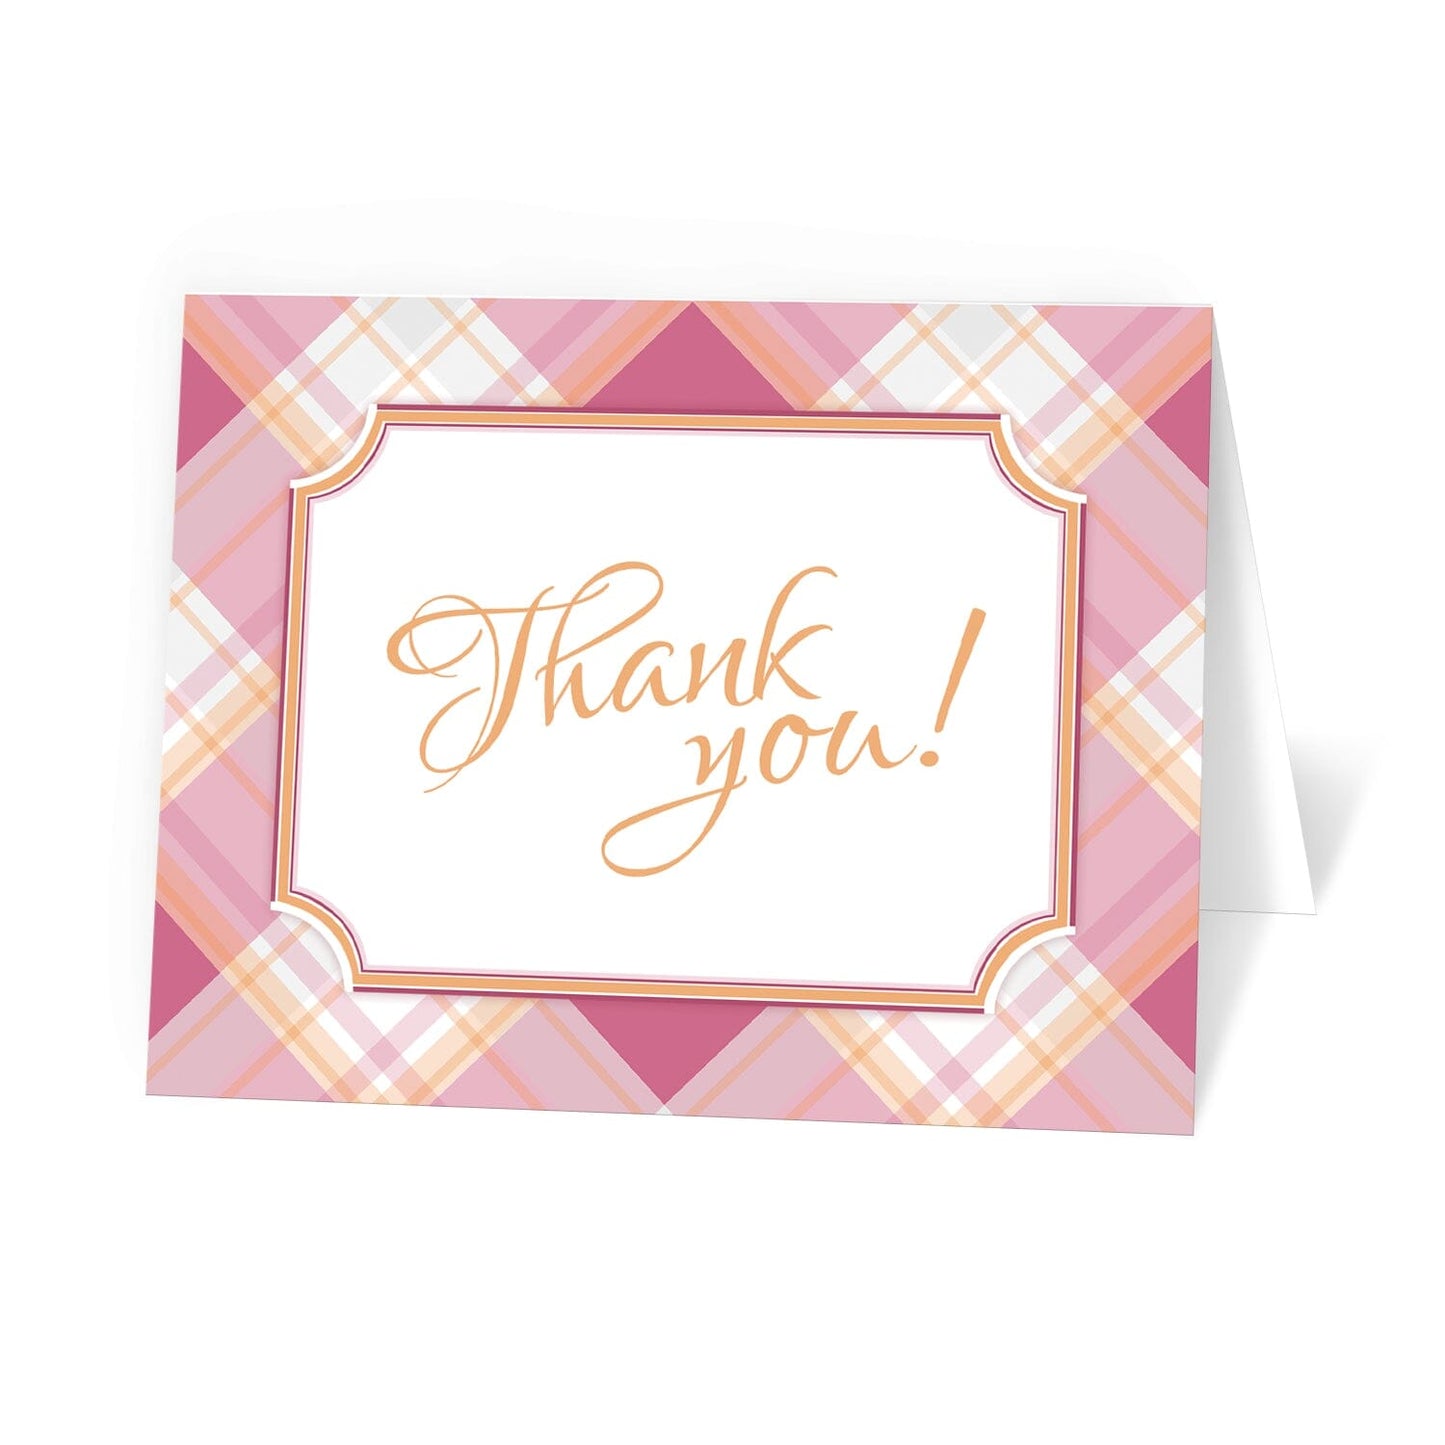 Pink and Orange Plaid Thank You Cards at Artistically Invited.